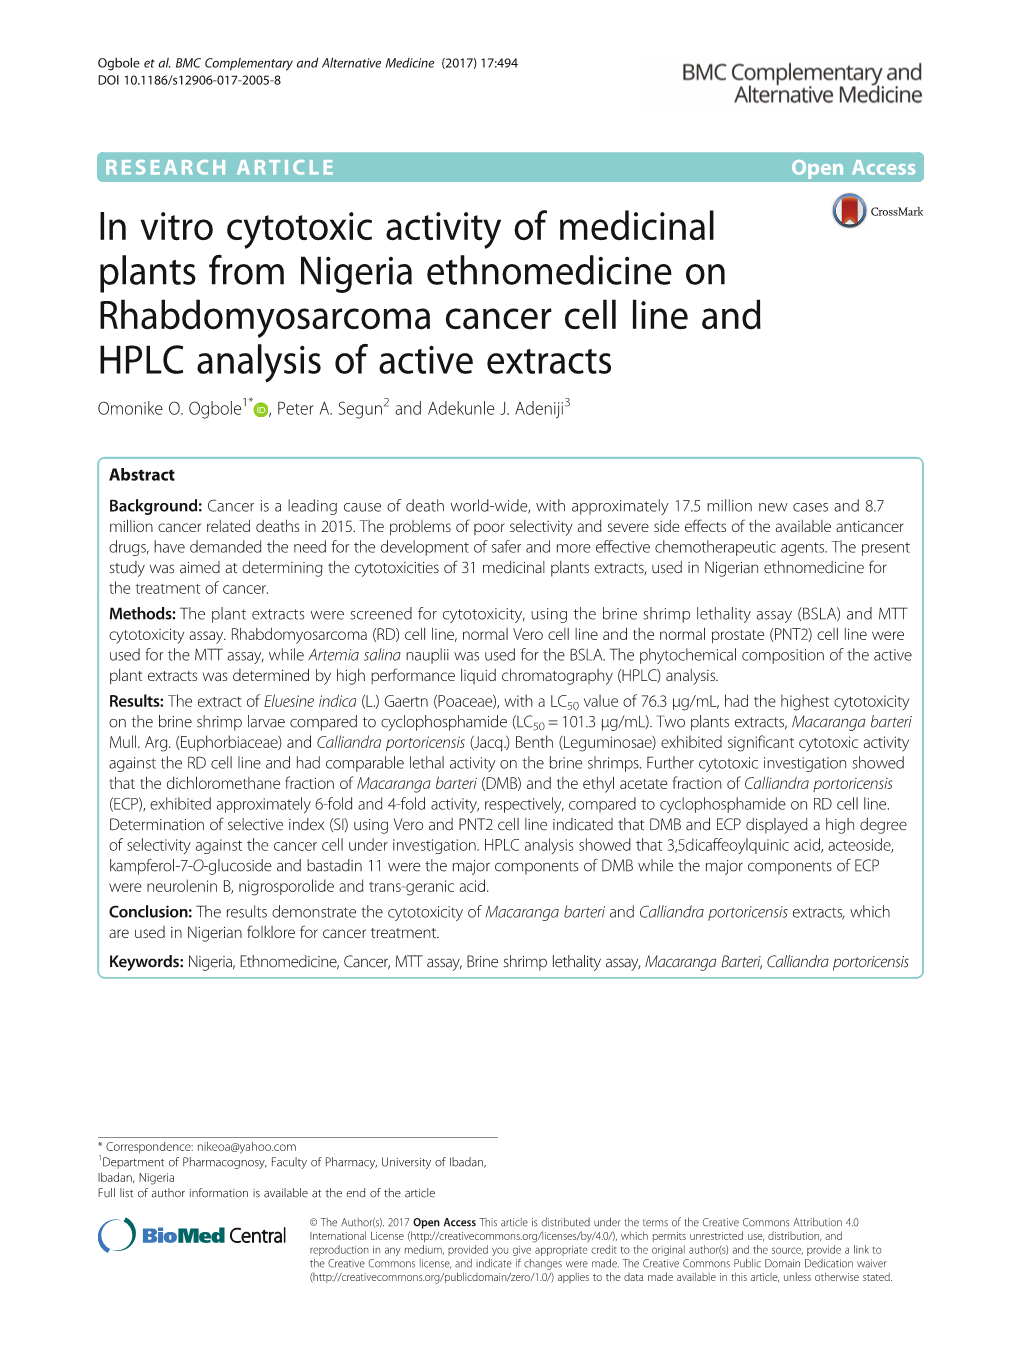 In Vitro Cytotoxic Activity of Medicinal Plants from Nigeria Ethnomedicine on Rhabdomyosarcoma Cancer Cell Line and HPLC Analysis of Active Extracts Omonike O